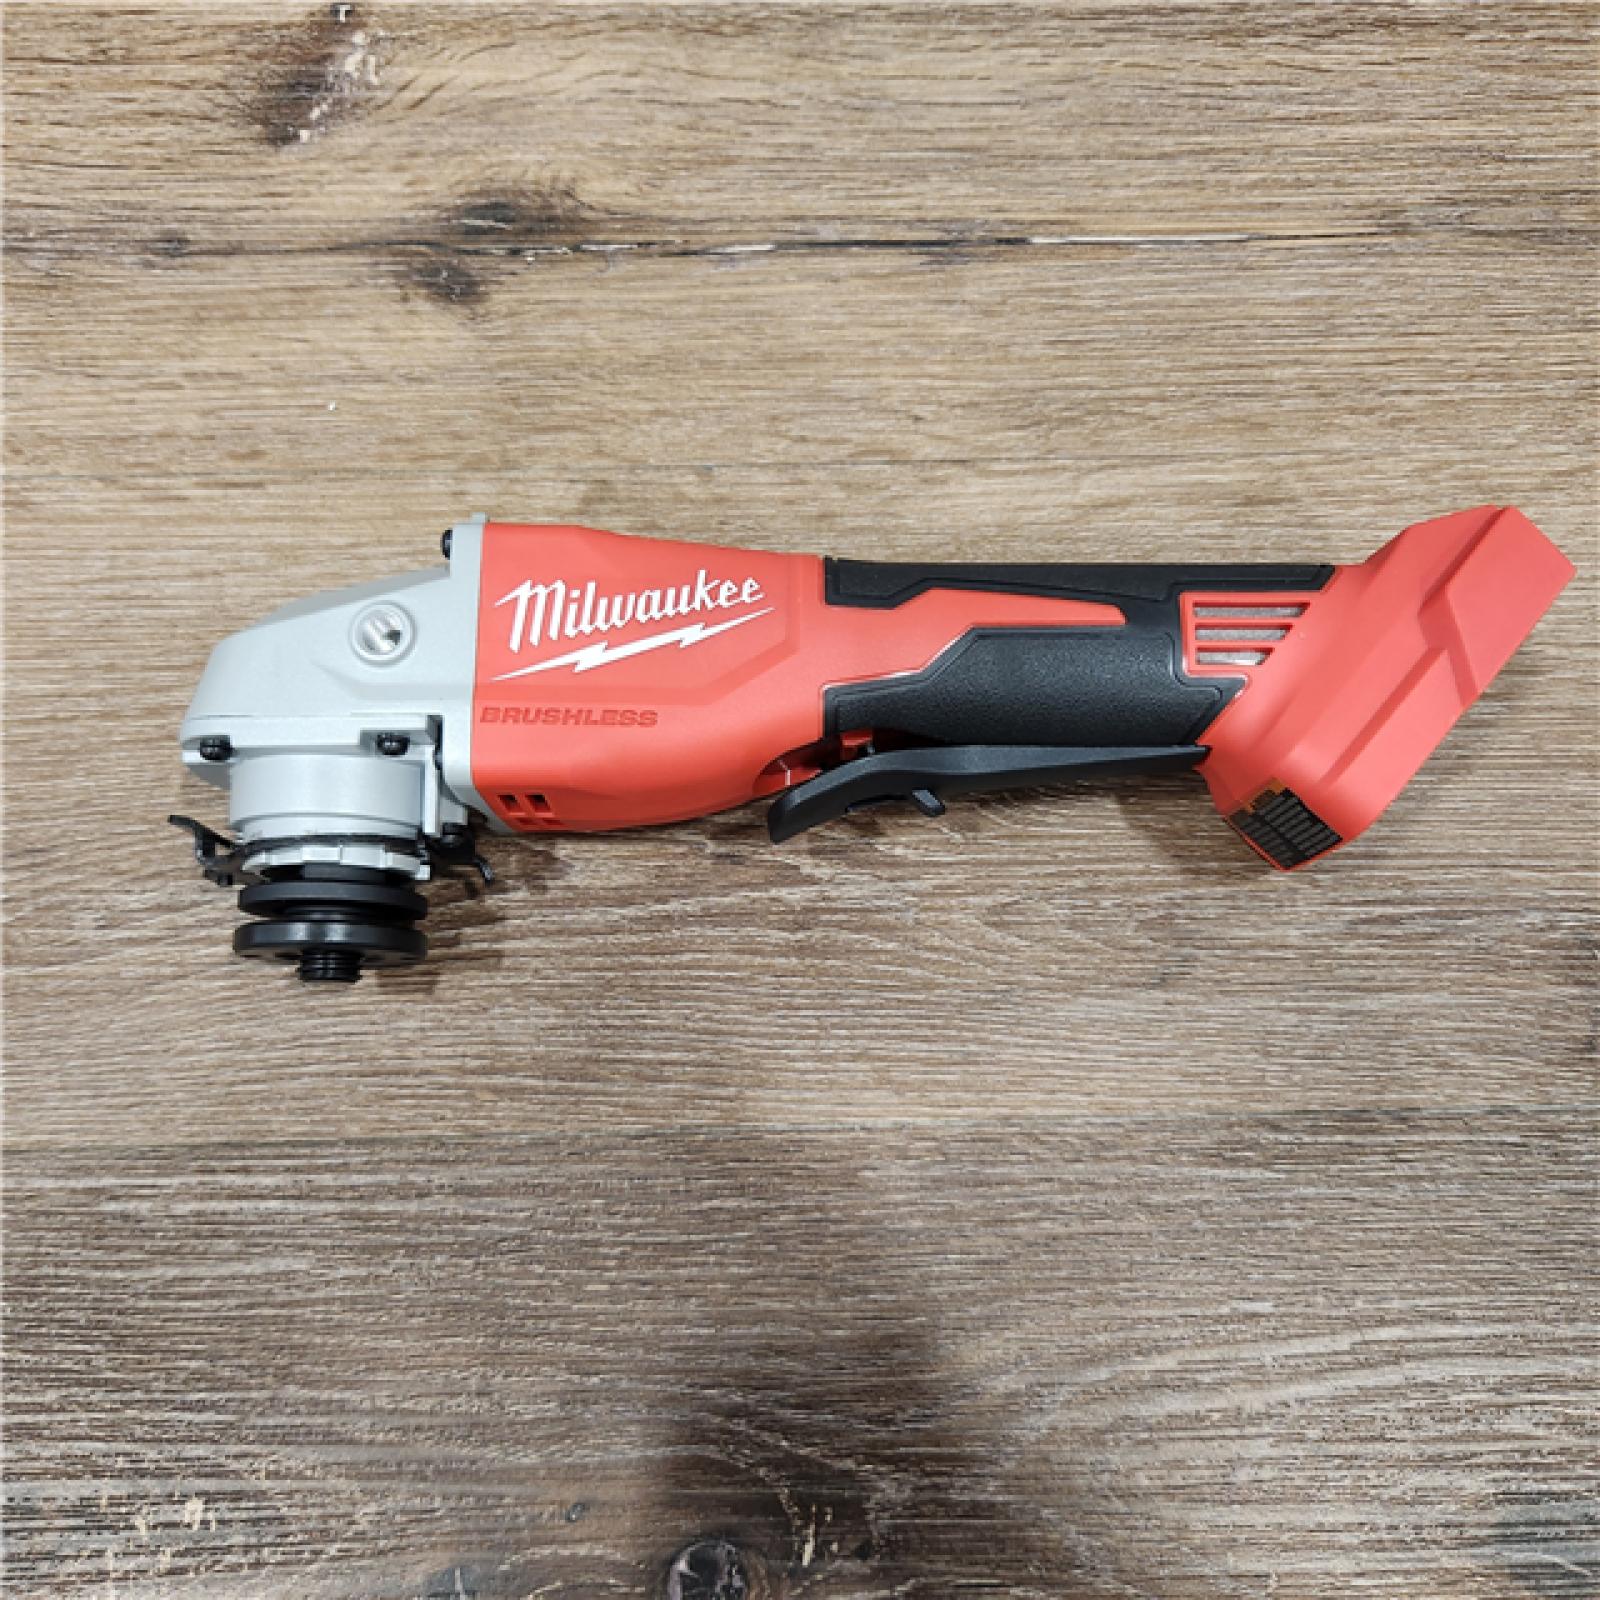 NEW! Milwaukee 2686-20 18V Cordless 4.5 /5  Grinder W/ Paddle Switch (Tool Only)